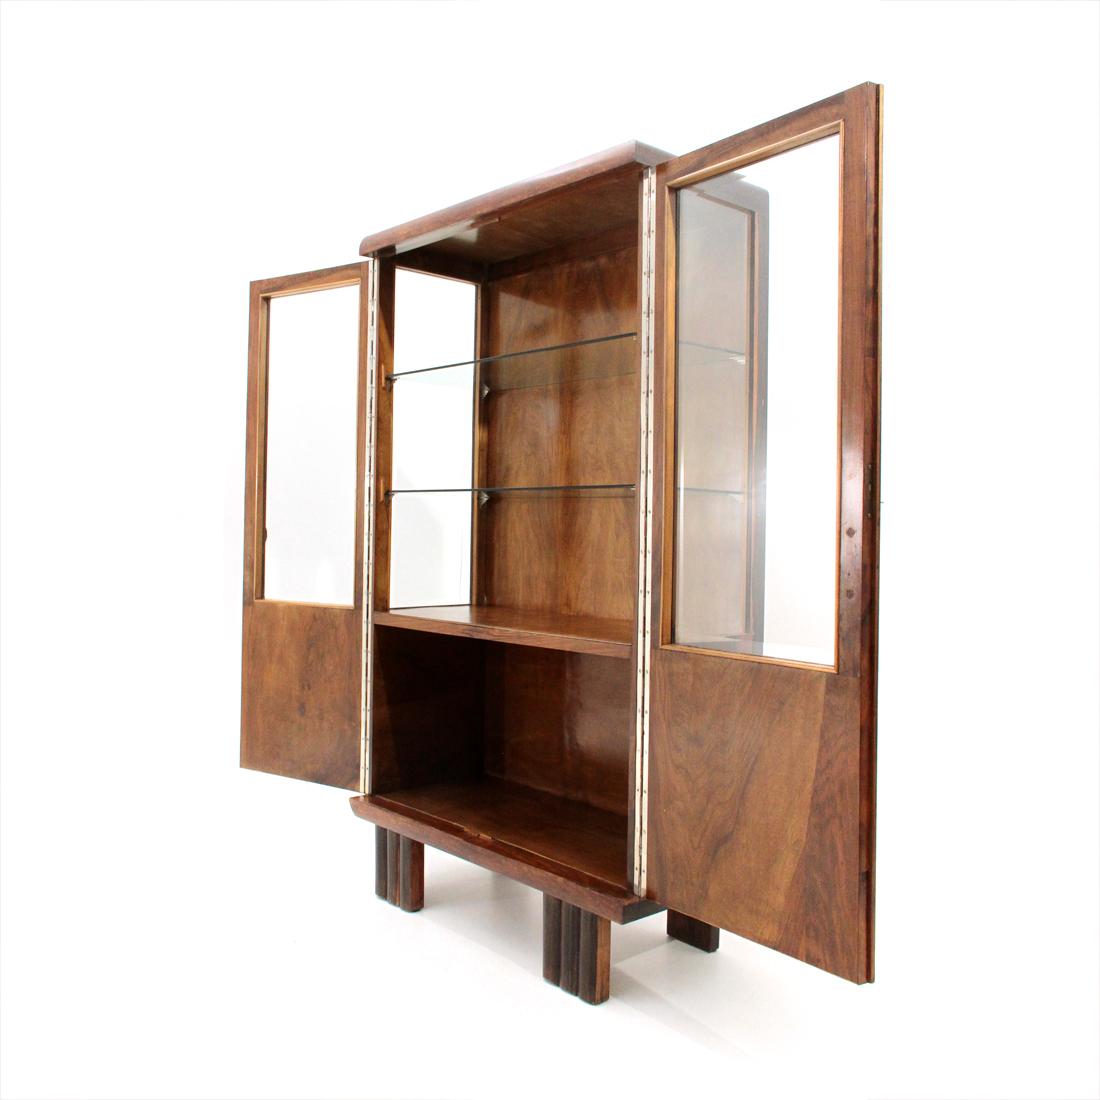 Italian manufacturing showcase 30s production.
Structure in veneered wood.
Metal details.
Two glass shelves.
Legs in grissinato wood.
Good general conditions, some signs due to normal use over time, a shelf has a small stone, some holes for